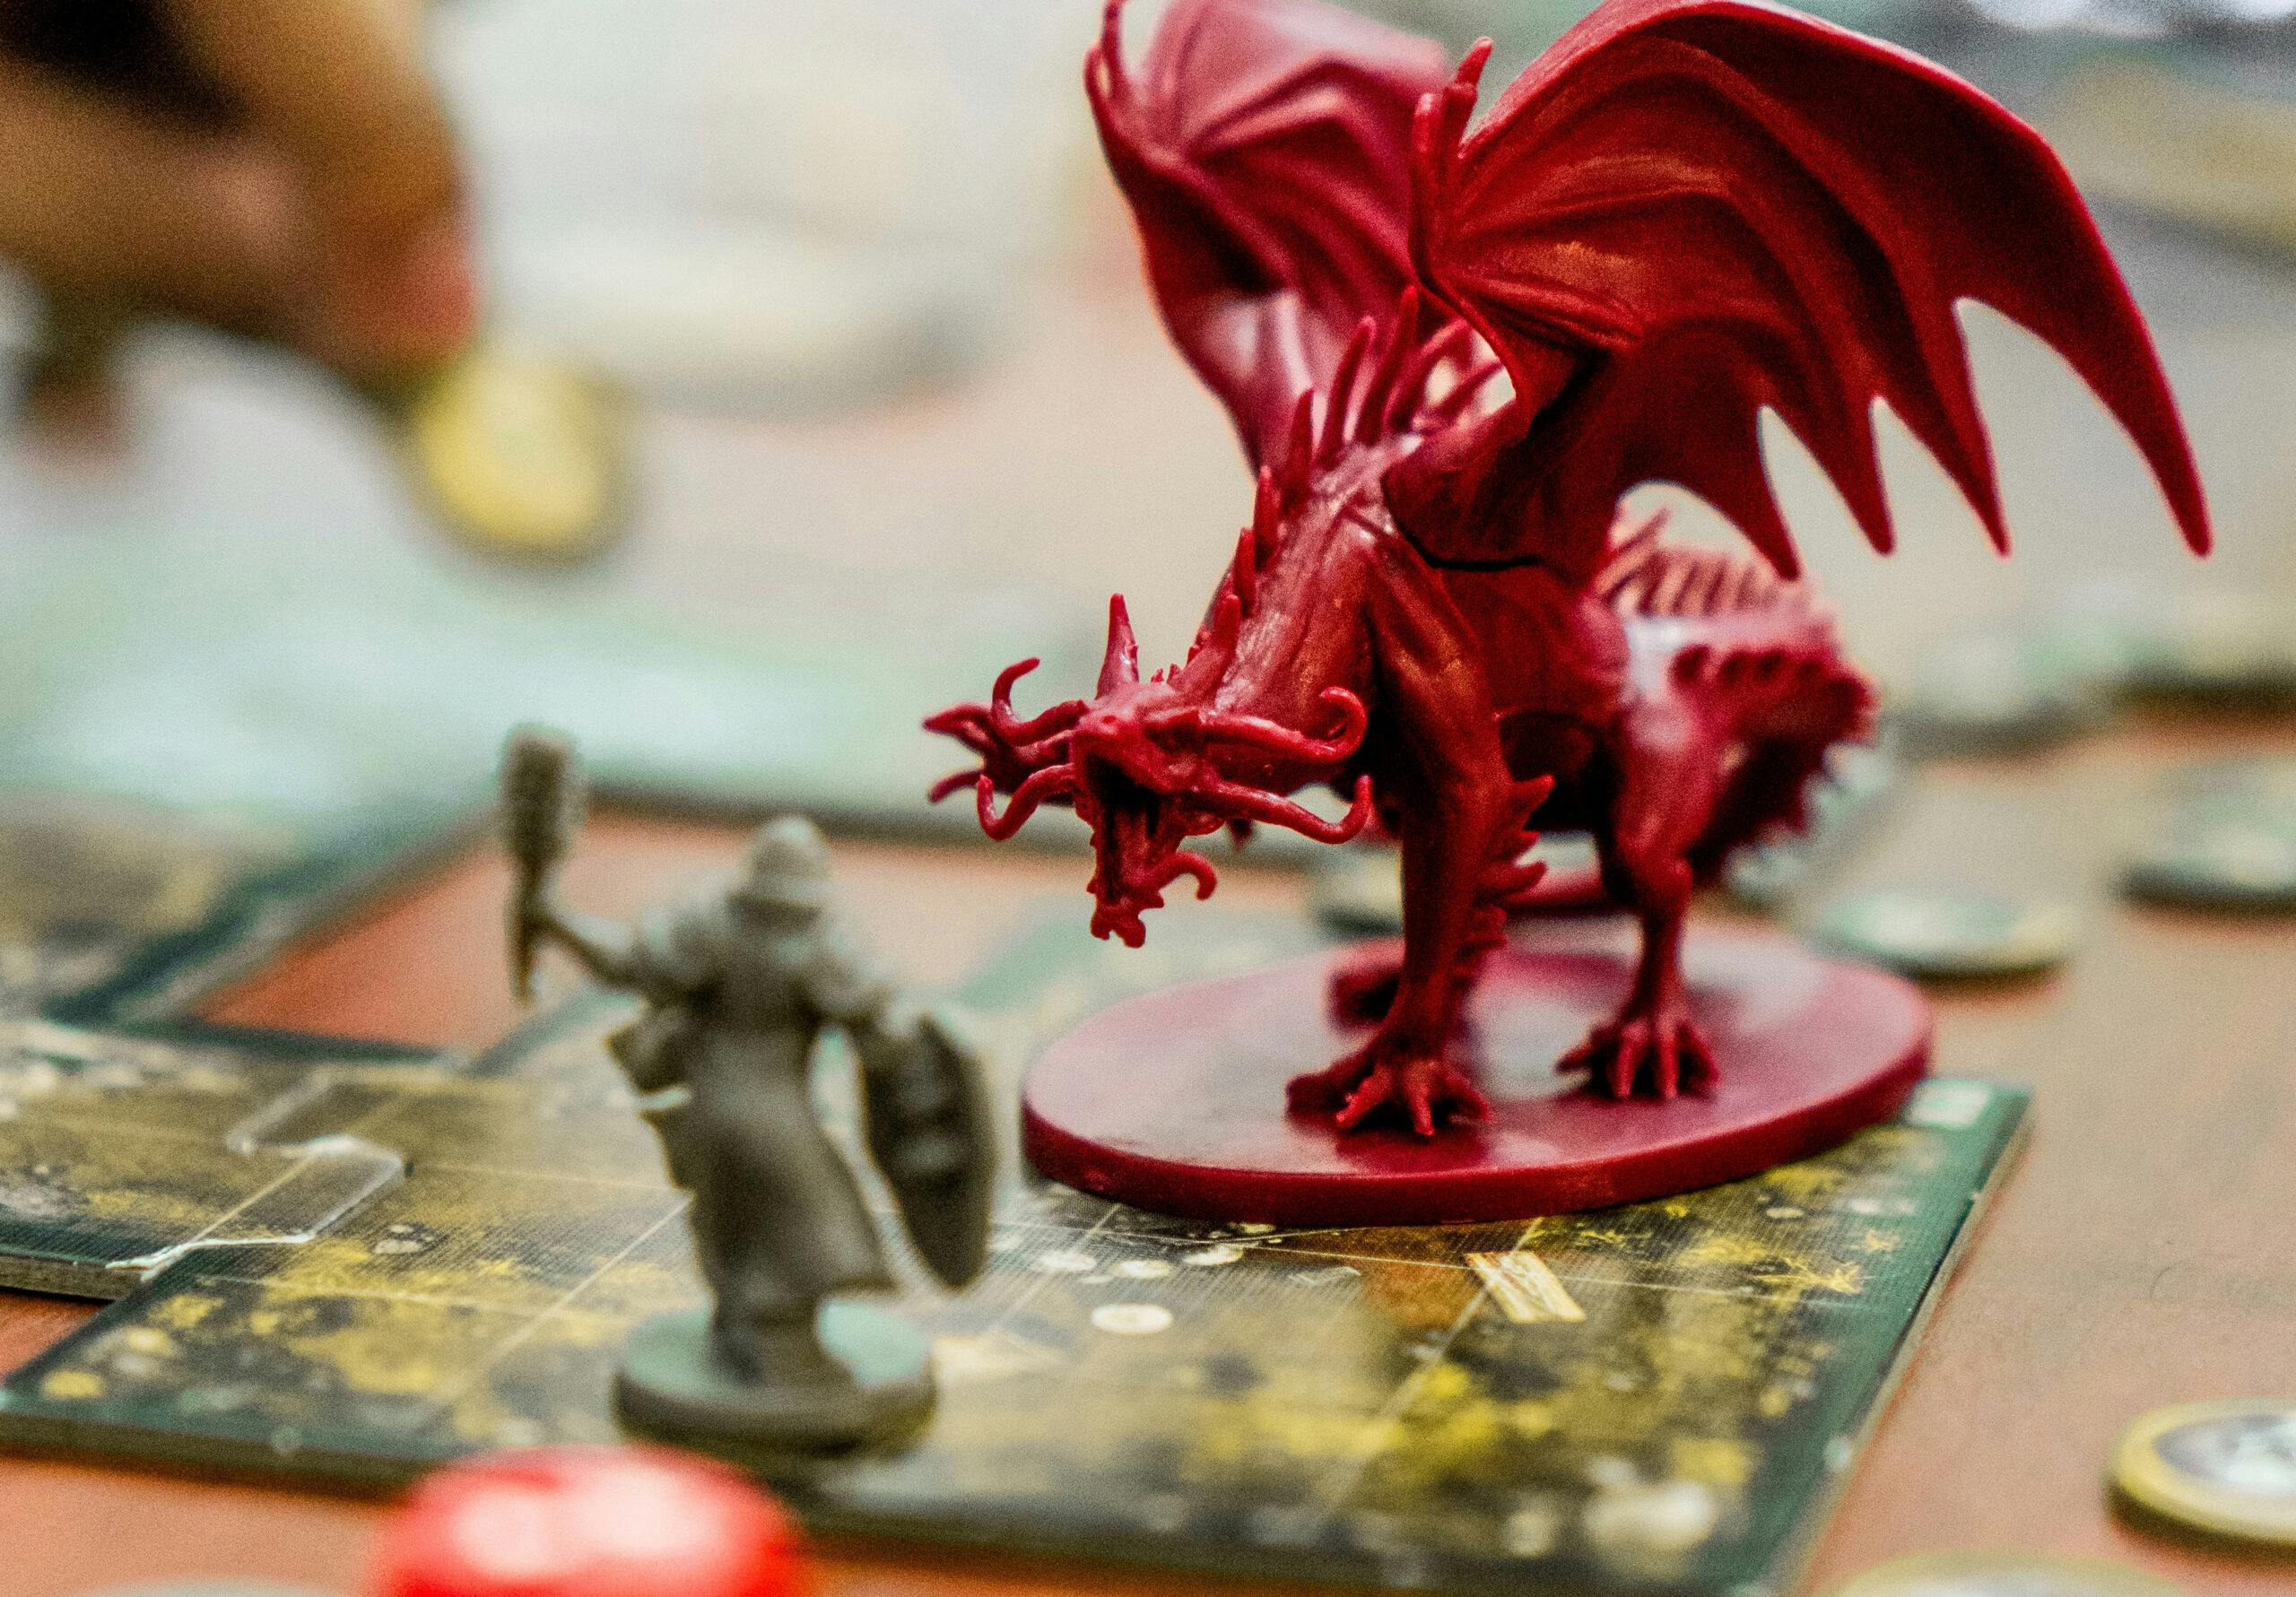 A red dragon figure roaring at a player's character piece.